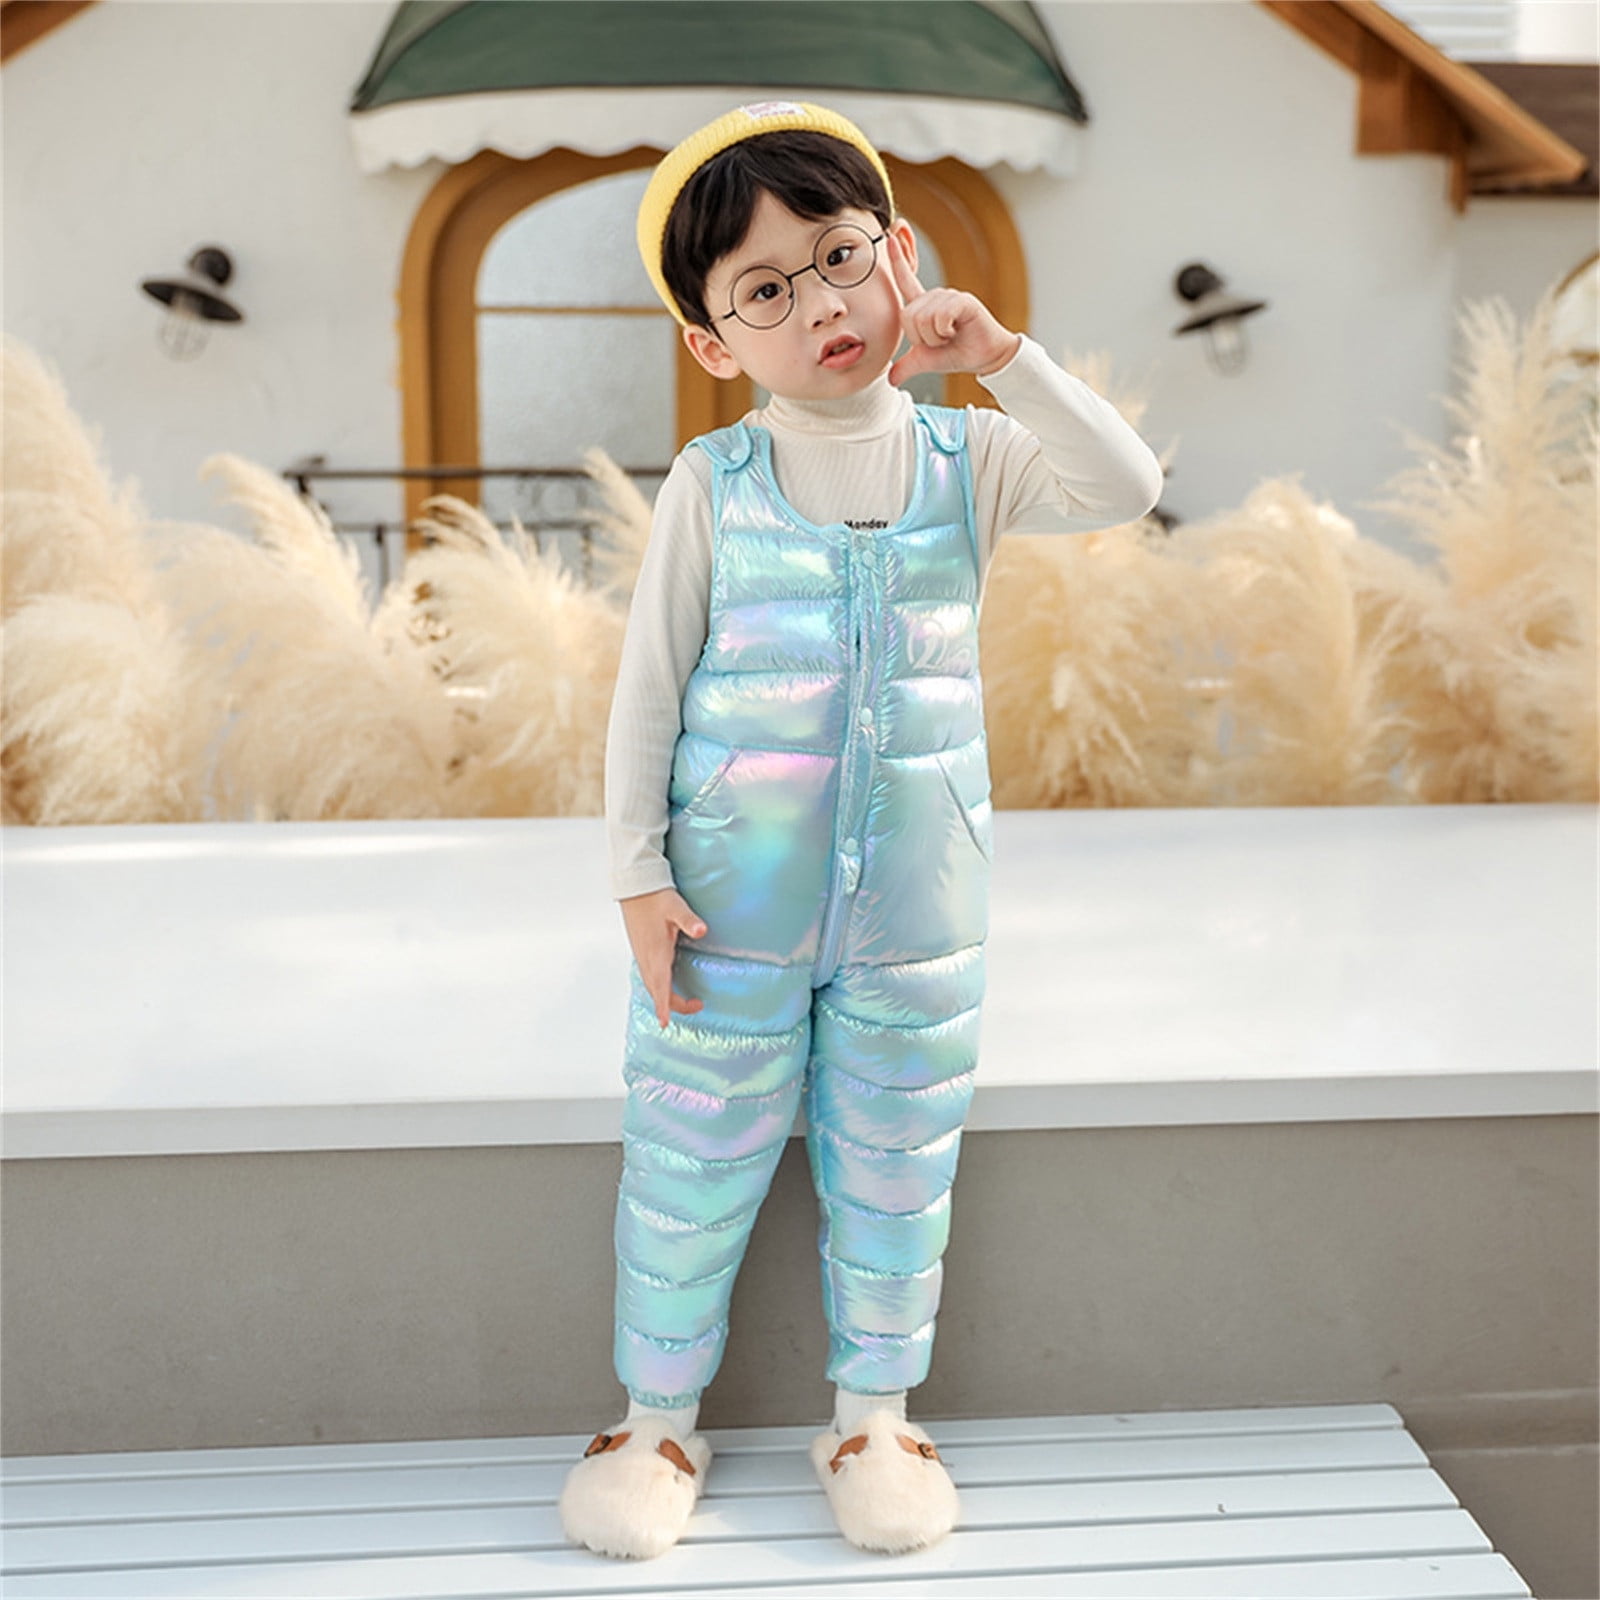 Children Kids Toddler Toddler Baby Boys Girls Sleeveless Winter Warm Shiny  Jumpsuit Cotton Wadded Suspender Ski Bib Pants Overalls Trousers Outfit  Clothes Light Blue 90 